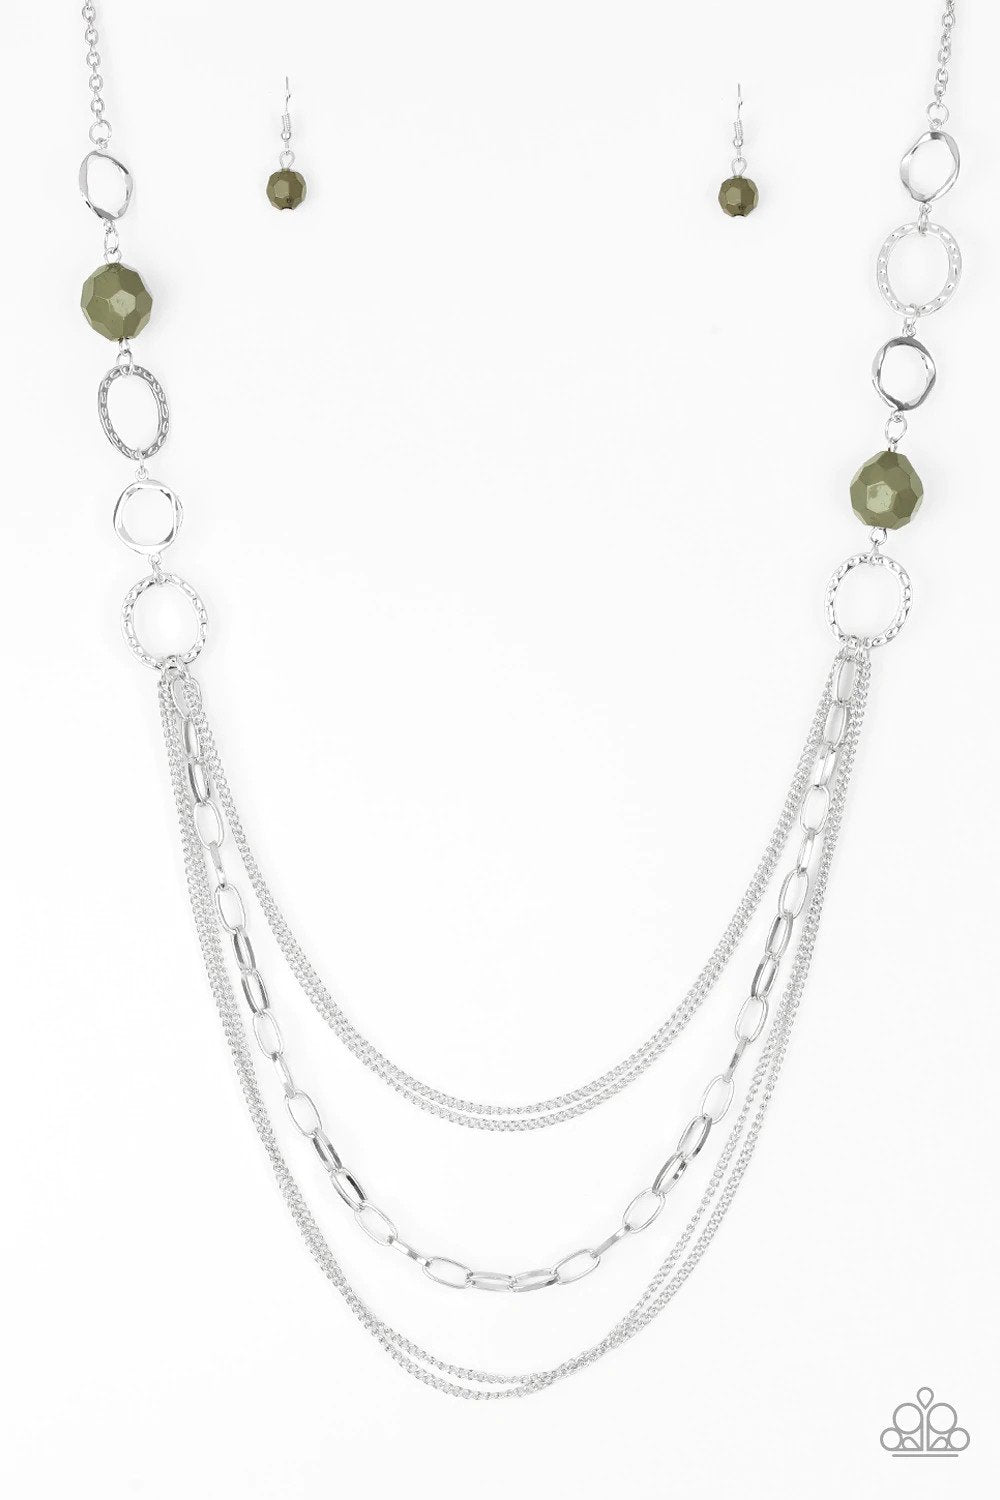 Margarita Masquerades Green Necklaces - Paparazzi Accessories- lightbox - CarasShop.com - $5 Jewelry by Cara Jewels